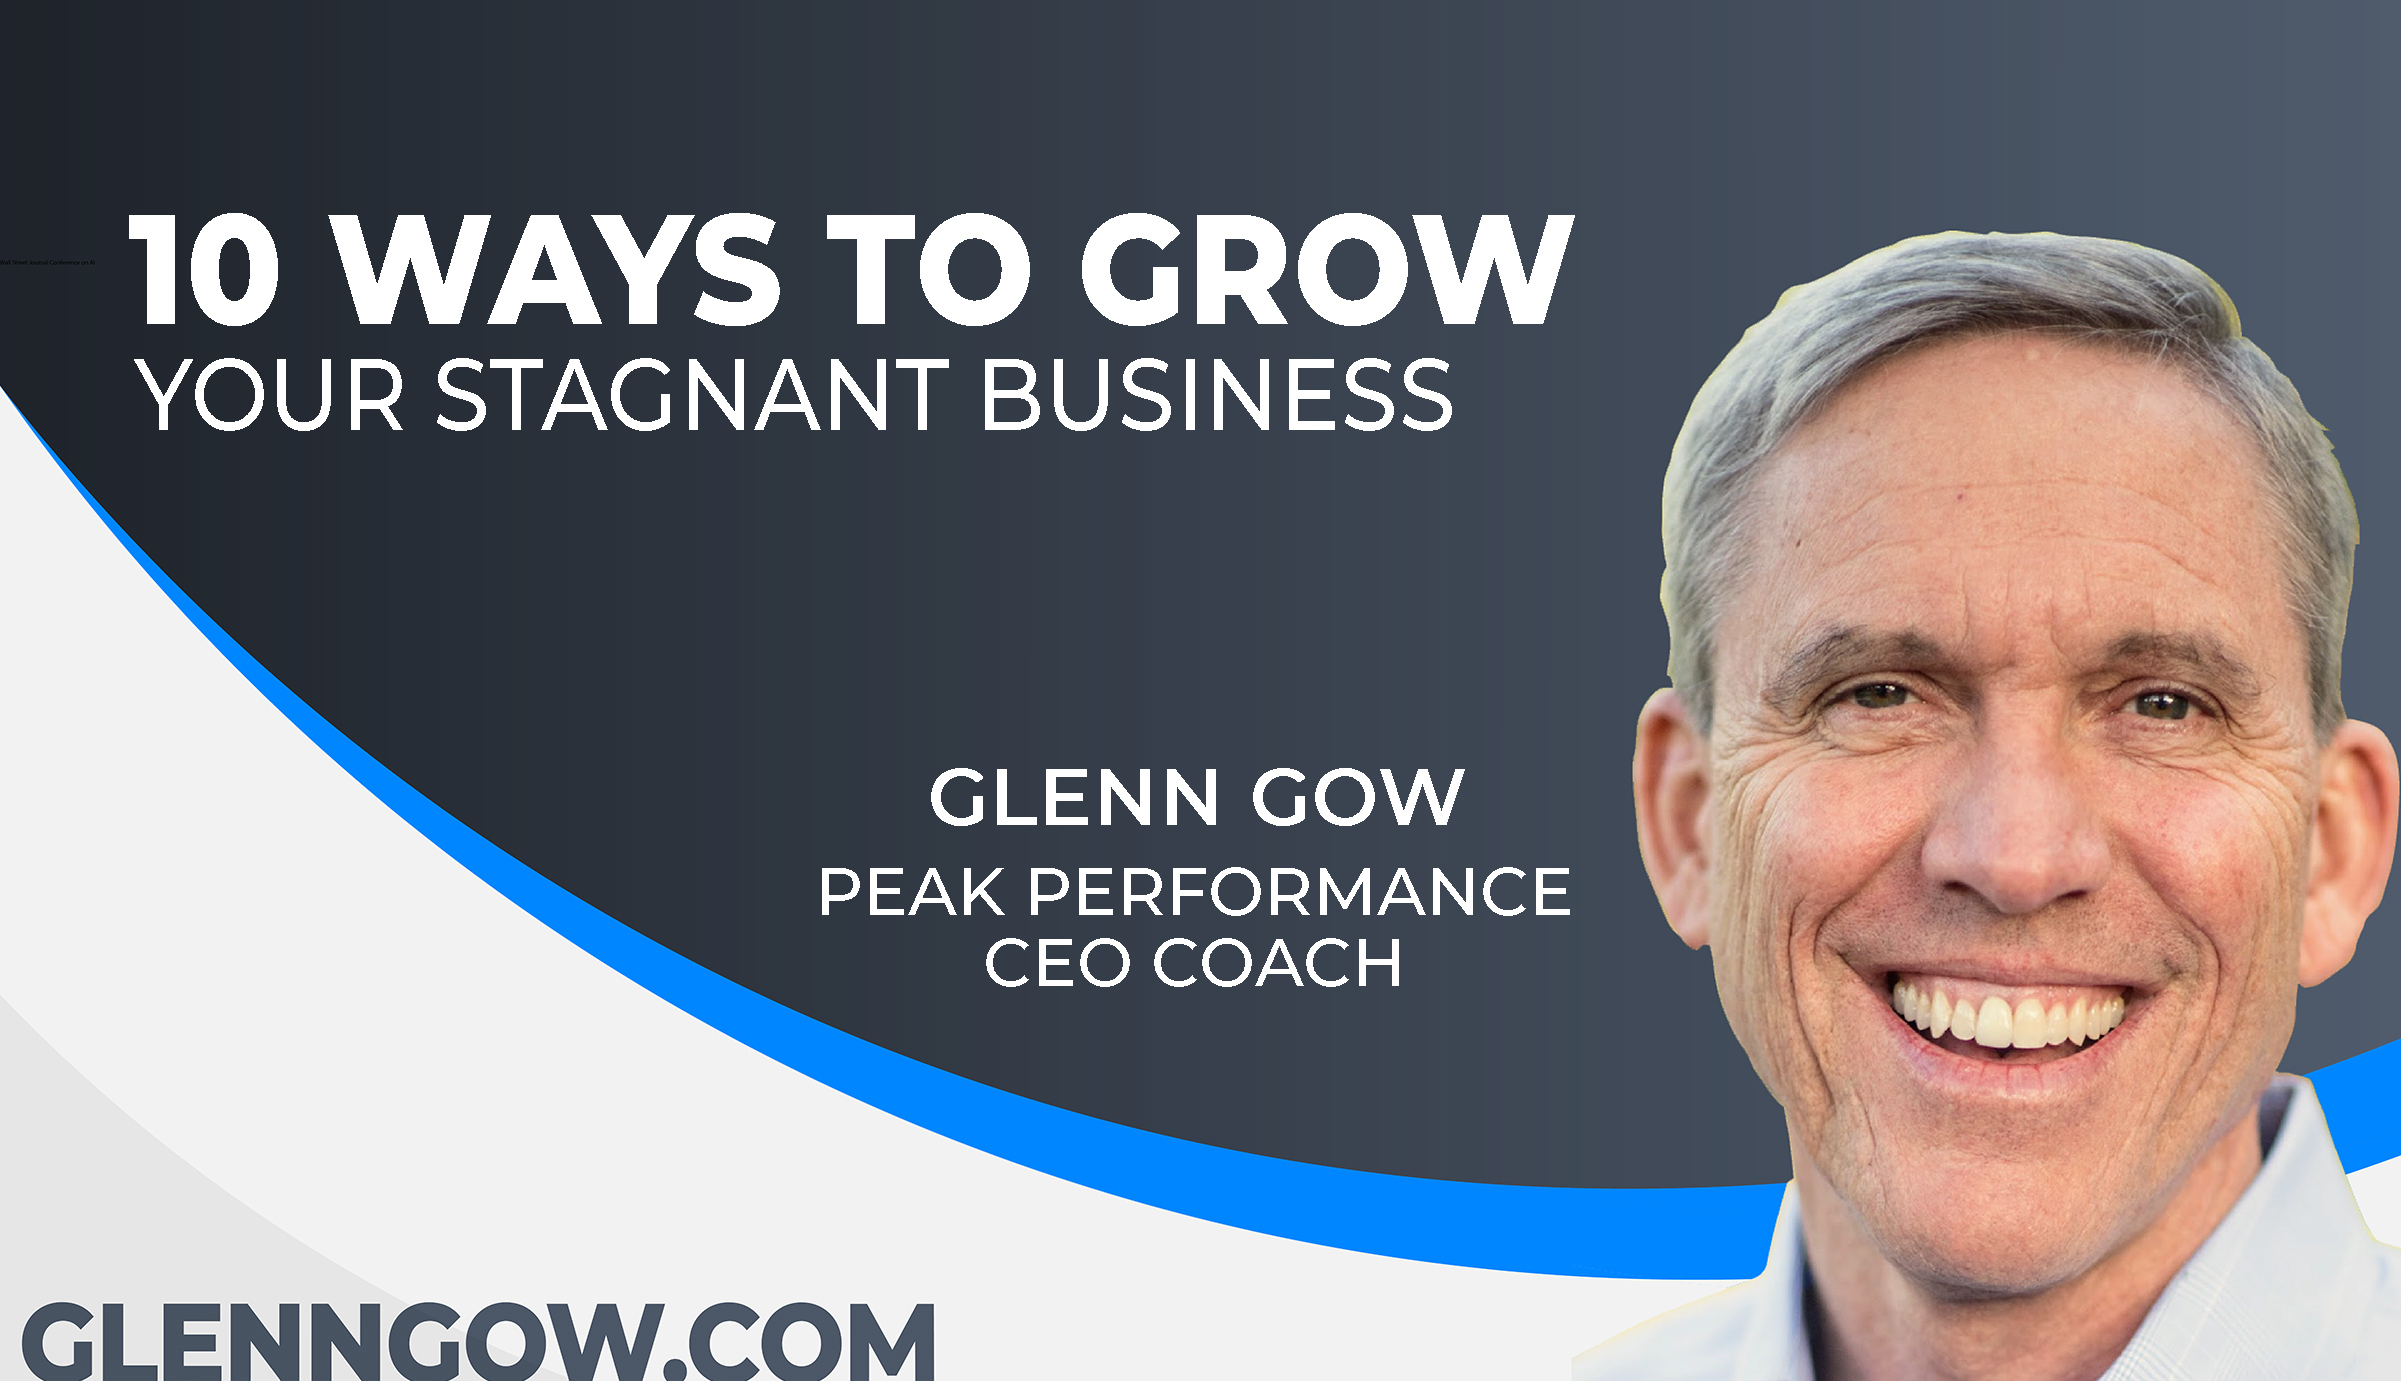 10 ways to grow your stagnant business